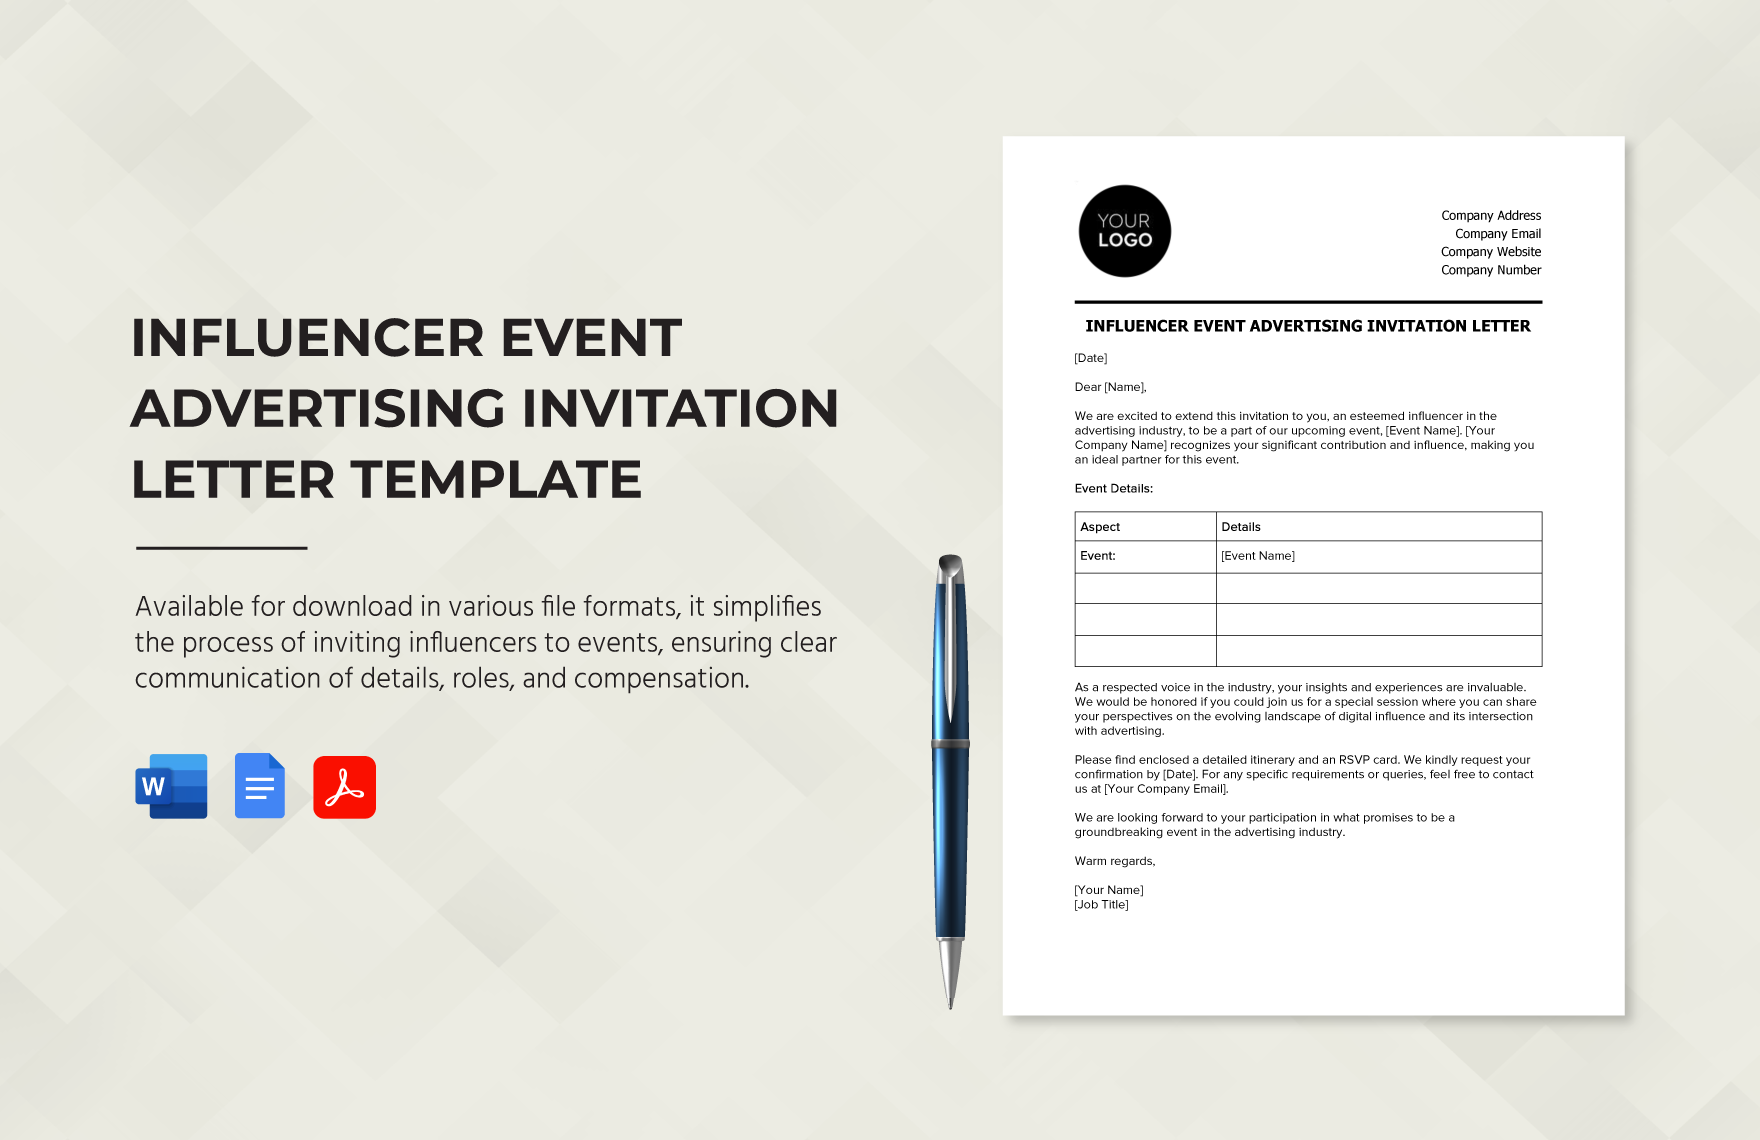 Influencer Event Advertising Invitation Letter Template